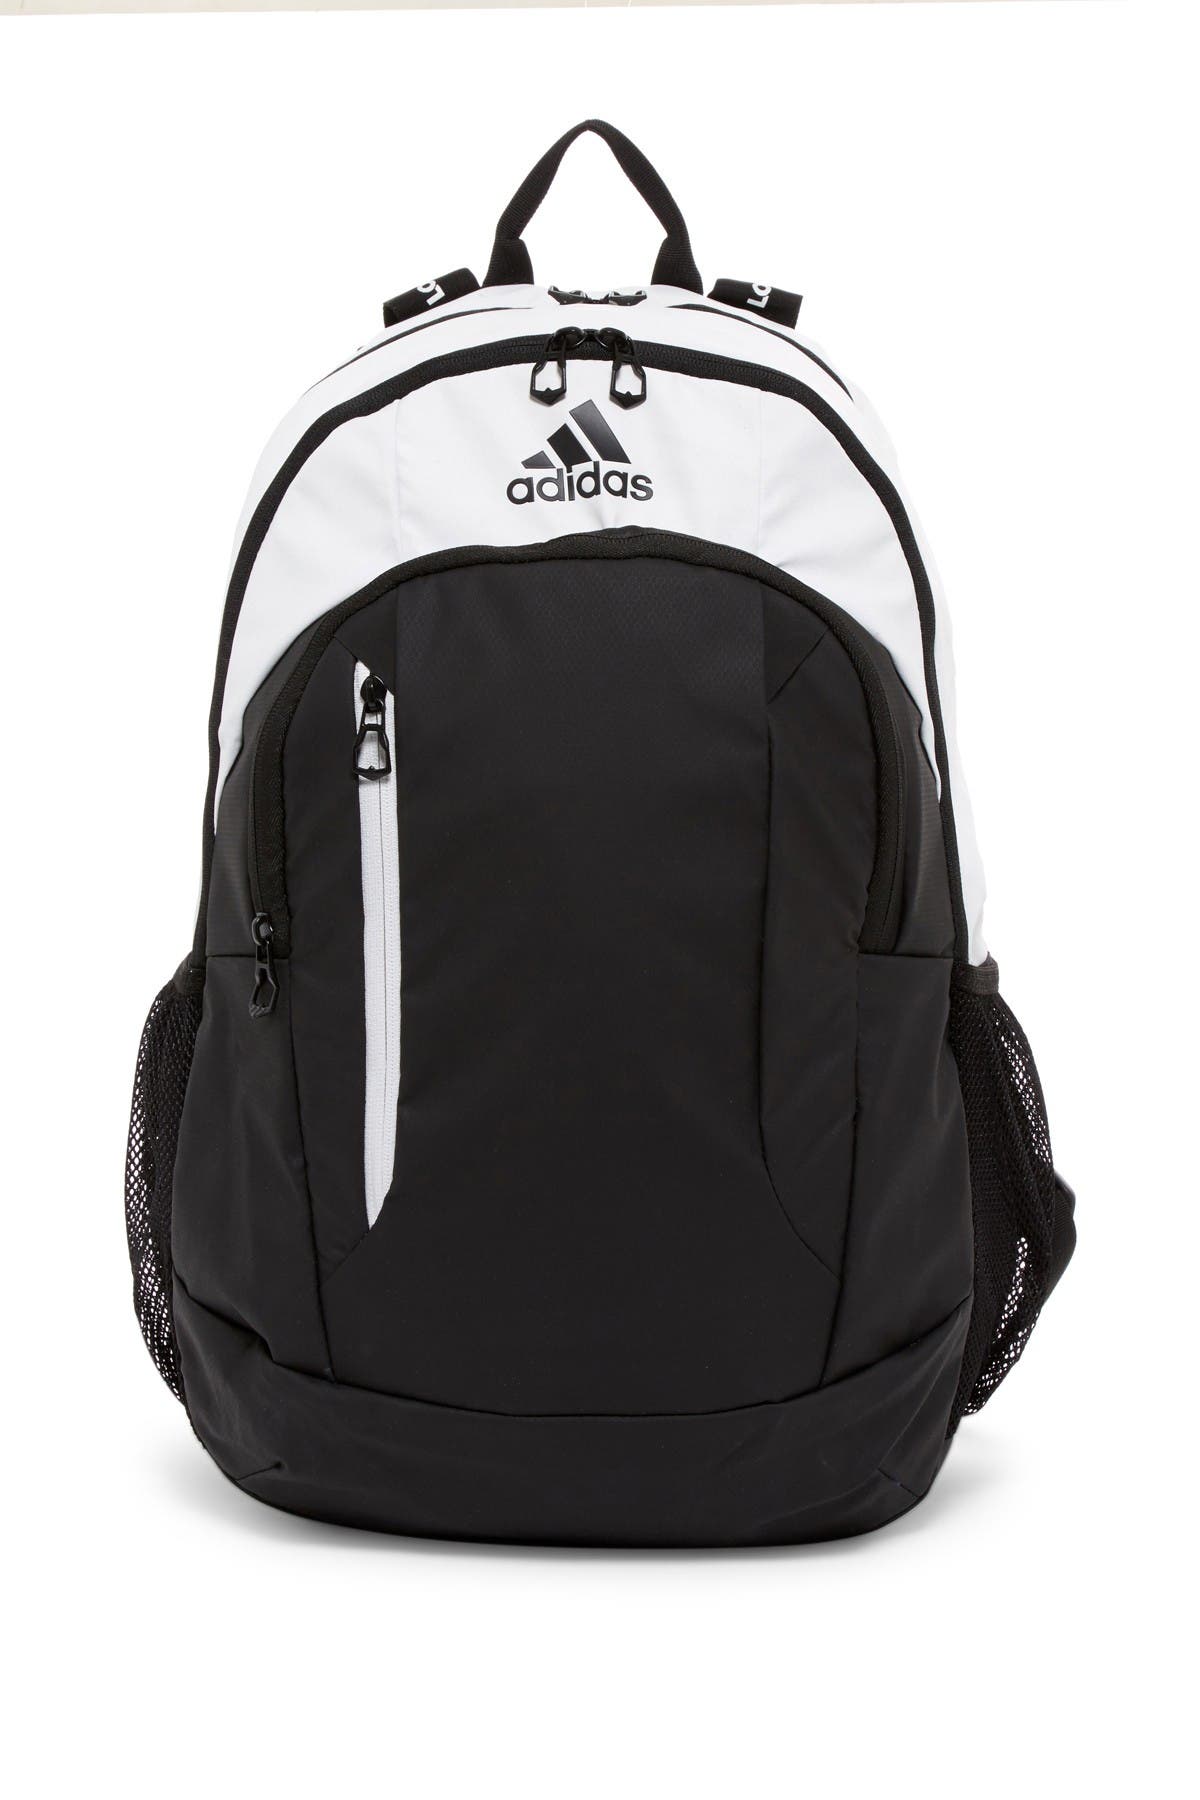 adidas mission backpack